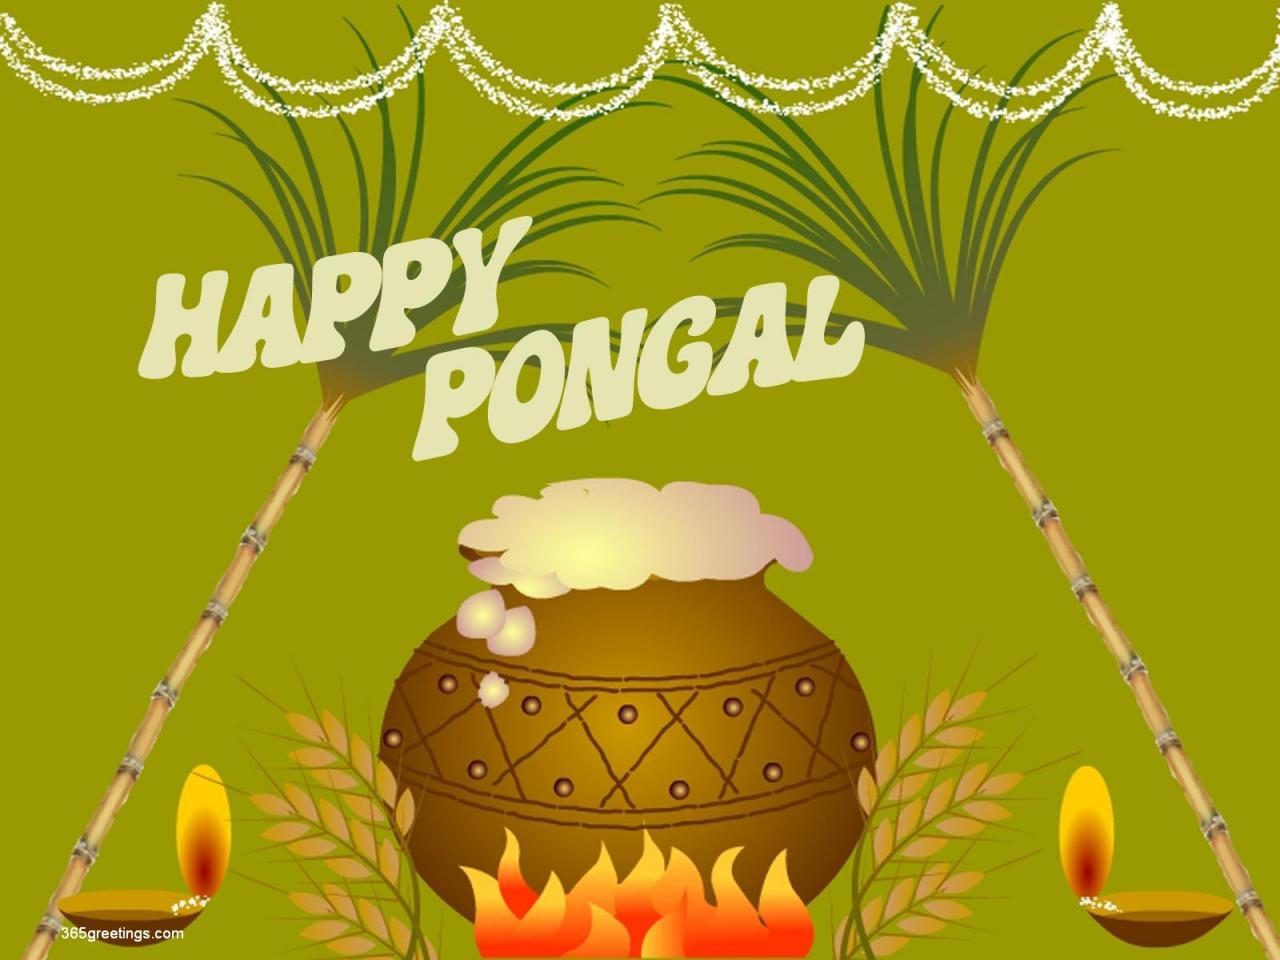 Happy Pongal 2021: Wishes, Messages, Quotes, Greetings, Images, WhatsApp &  Facebook Status to share